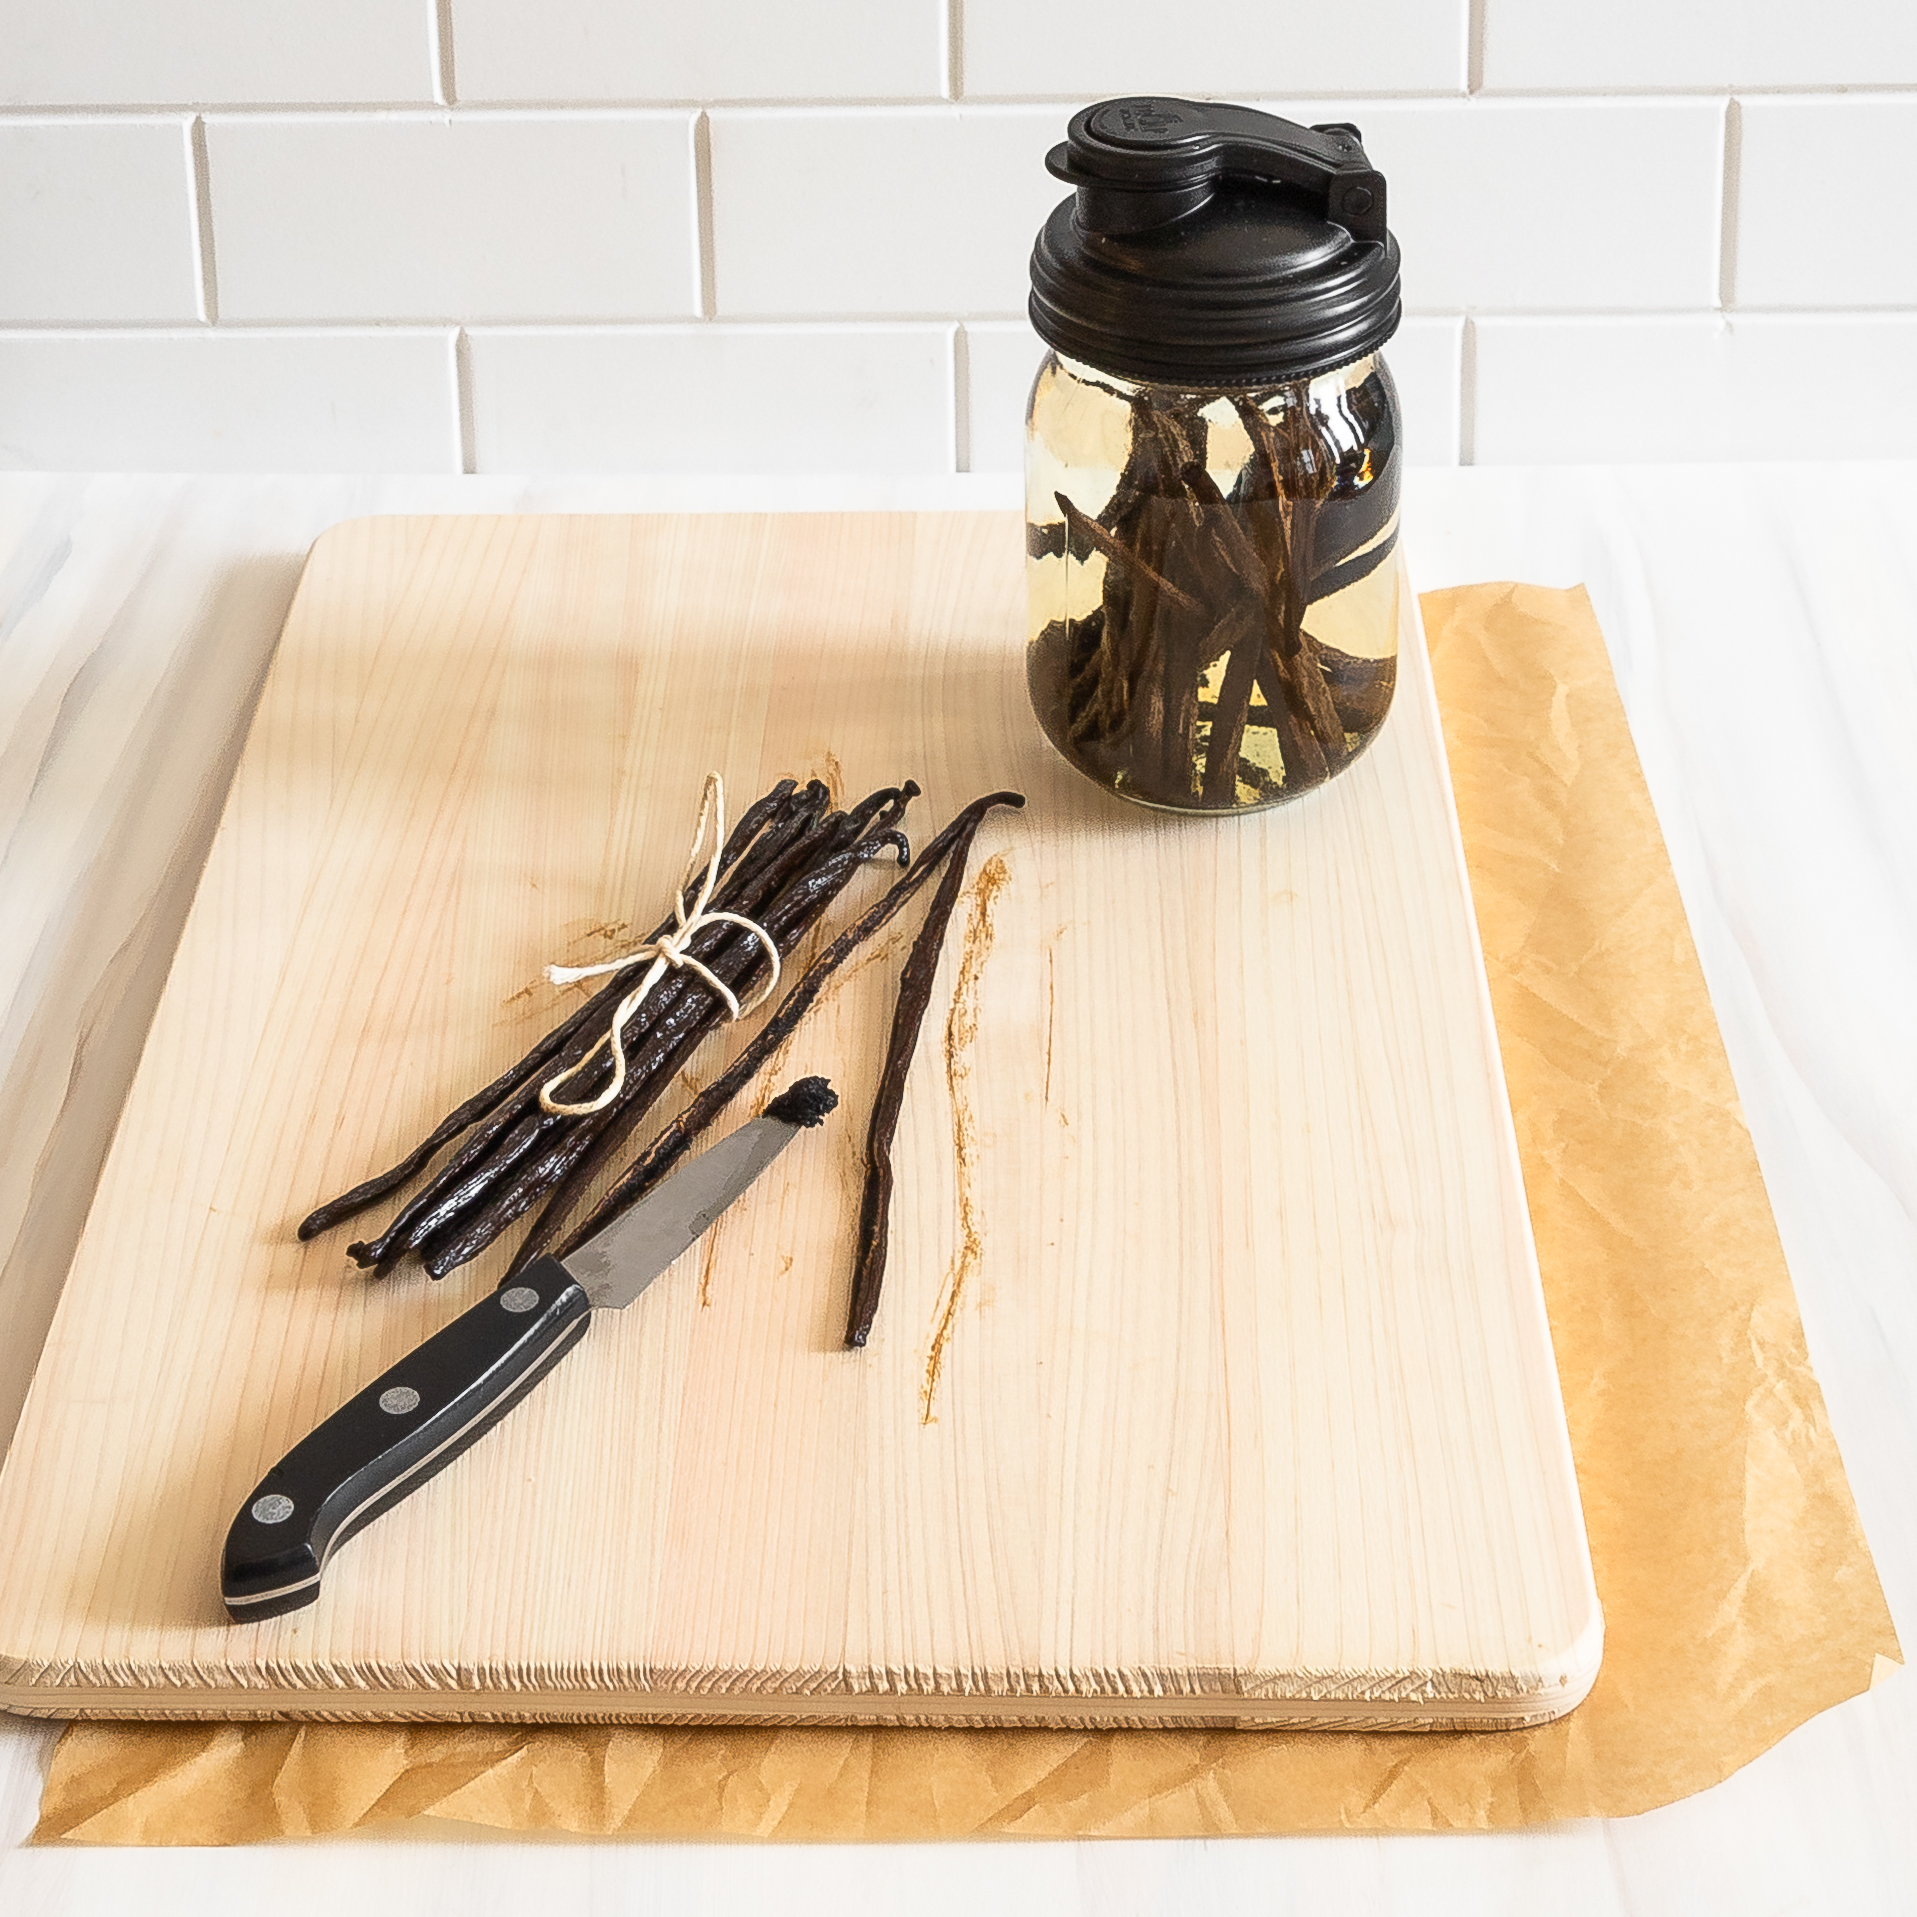 mason jar filled with alcohol and vanilla beans in the right background on a cutting board with vanilla beans and a paring knife in the foreground on the cutting board